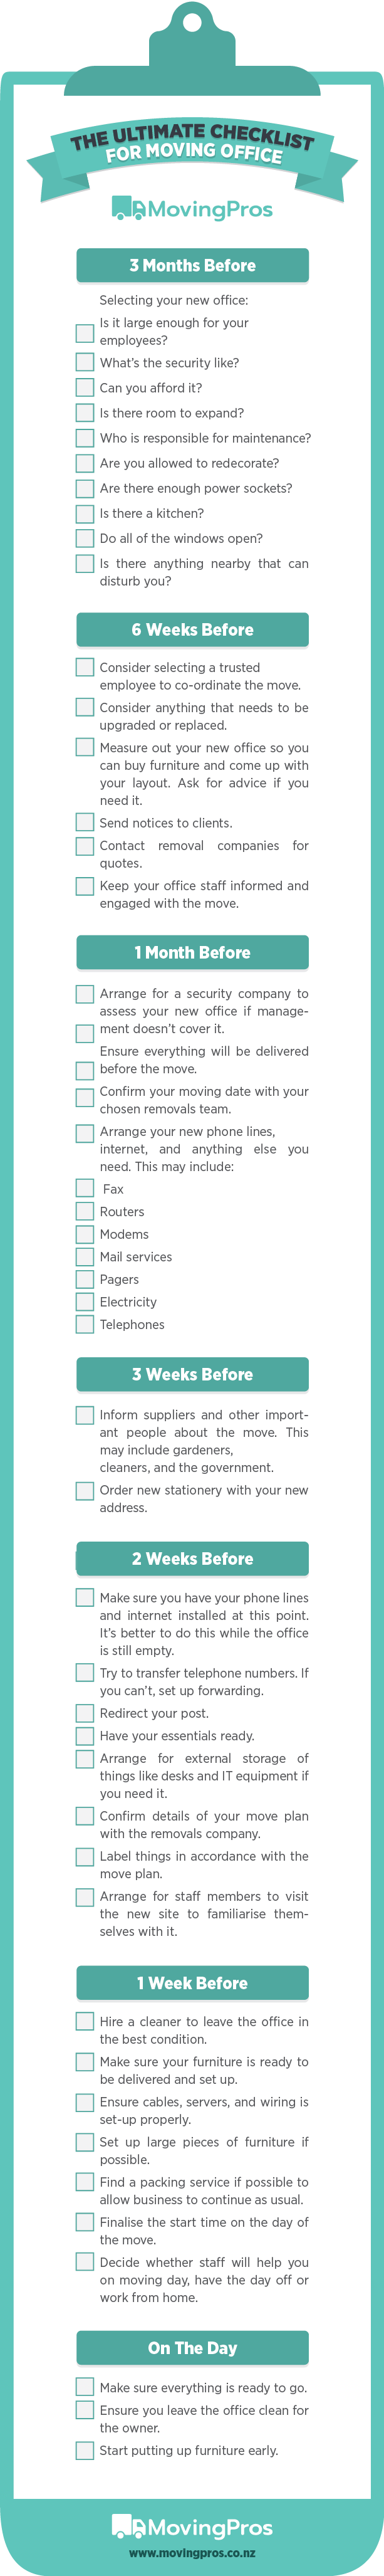 Moving Office Checklist Infographic